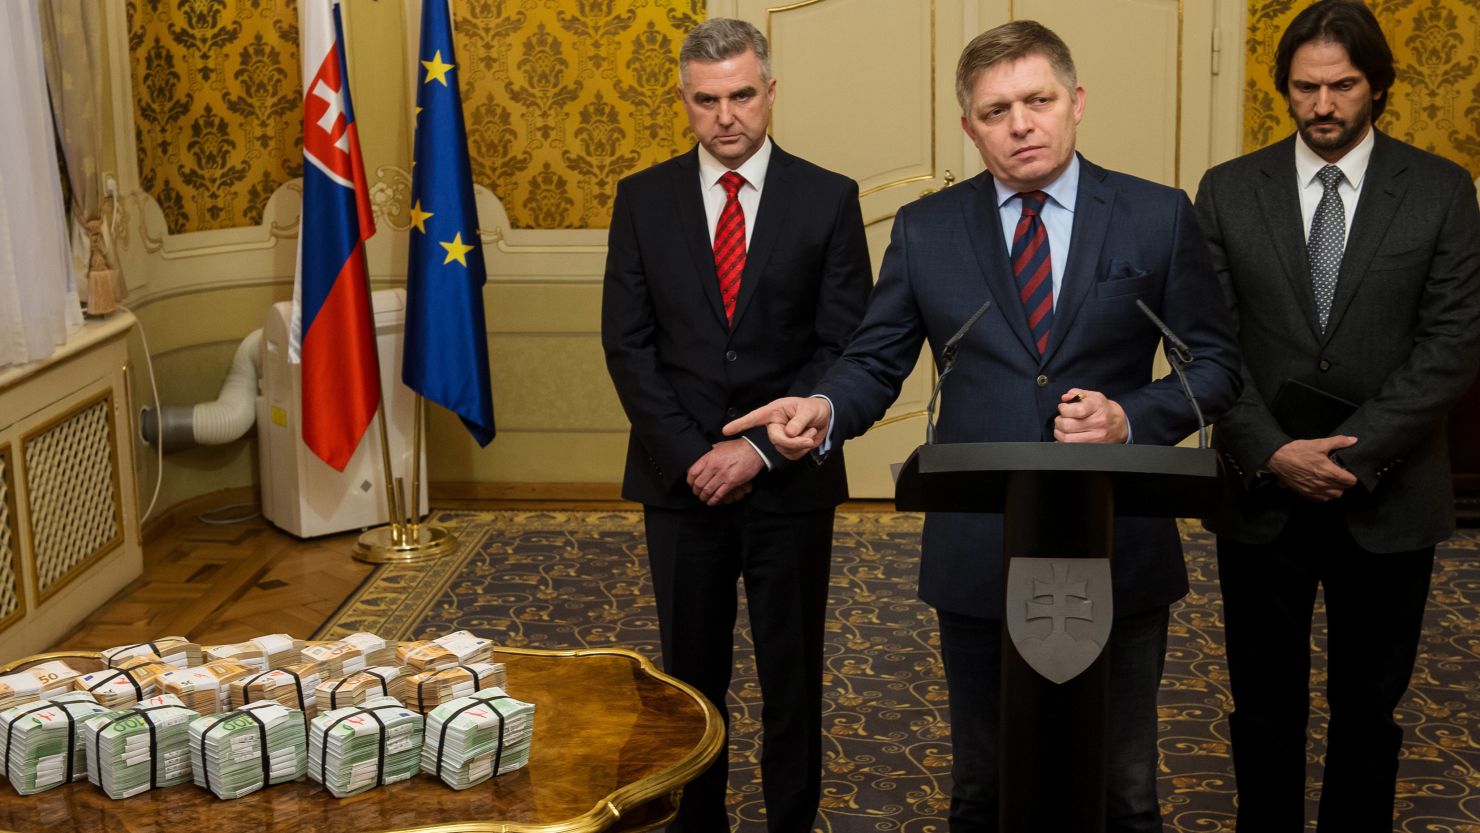 Slovak Prime Minister Robert Fico, center, points to the cash reward in a news briefing Tuesday.  